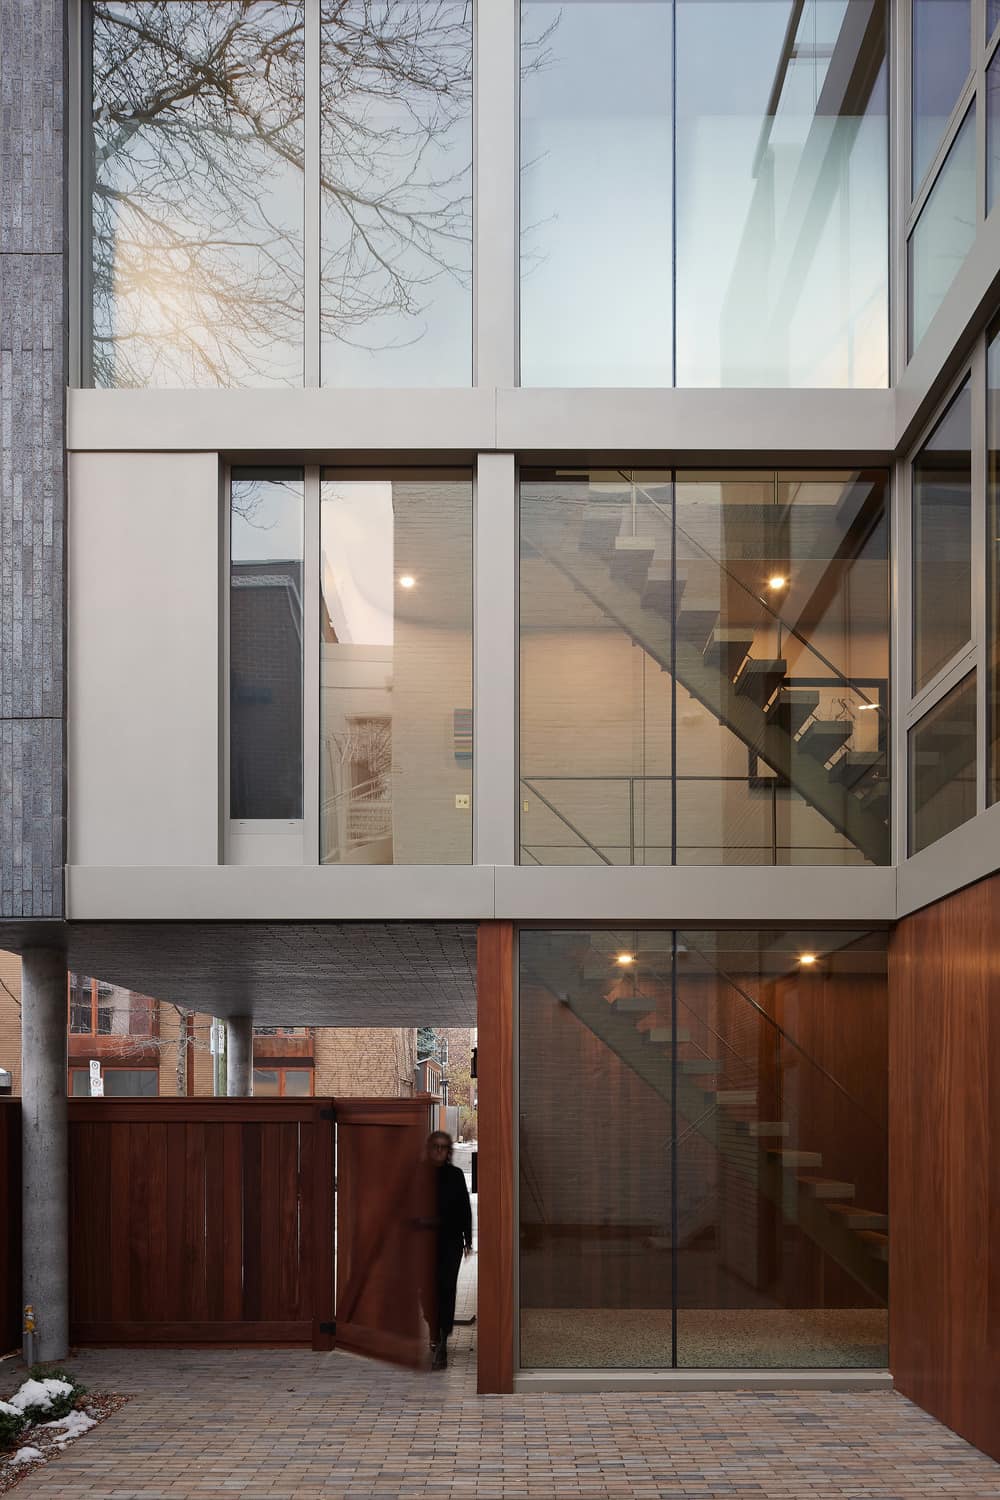 Maison Carlier, Montreal / yh2